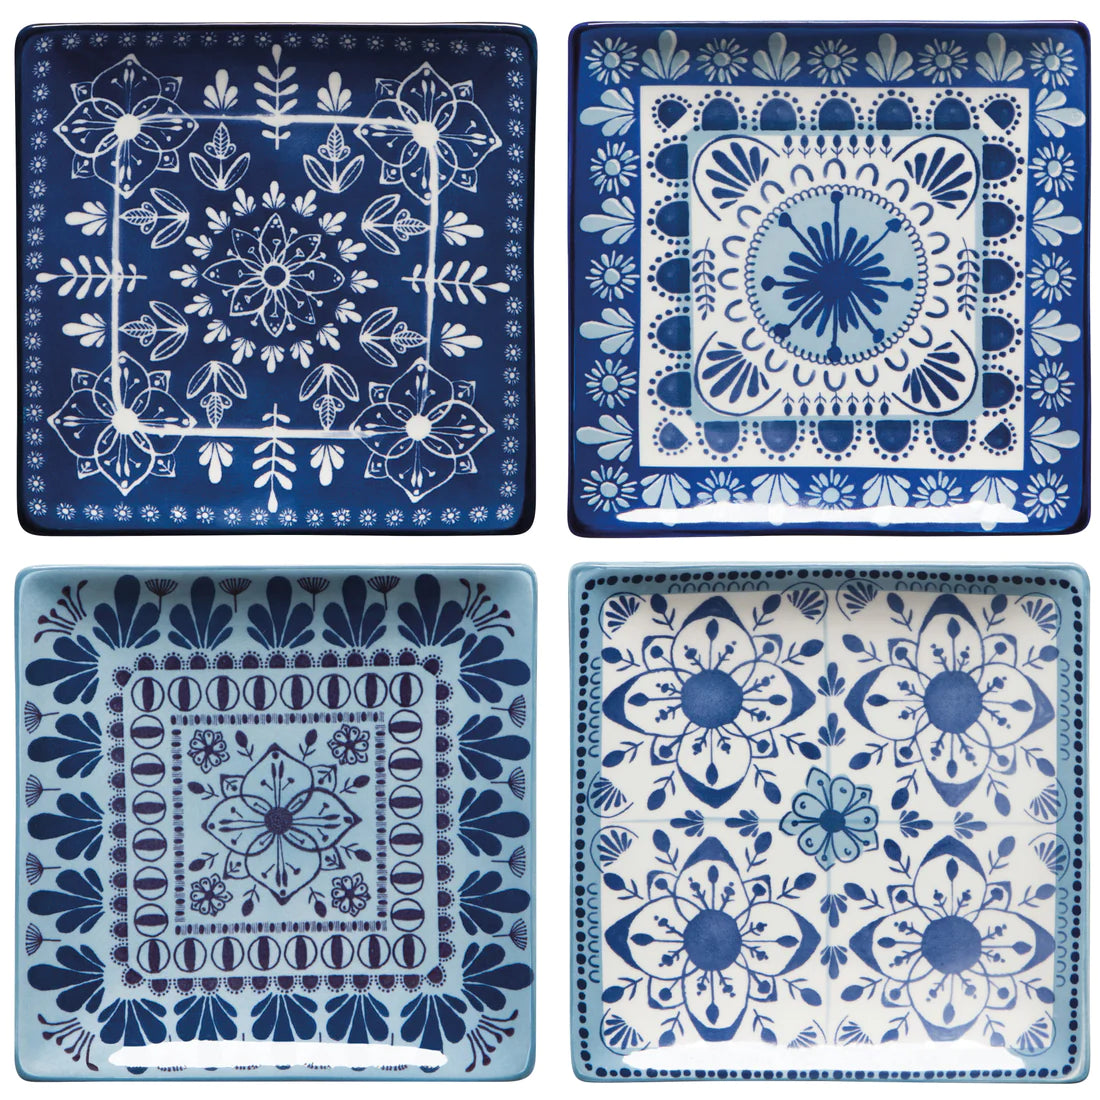 Porto Stamped Appetizer Plates - Set of 4